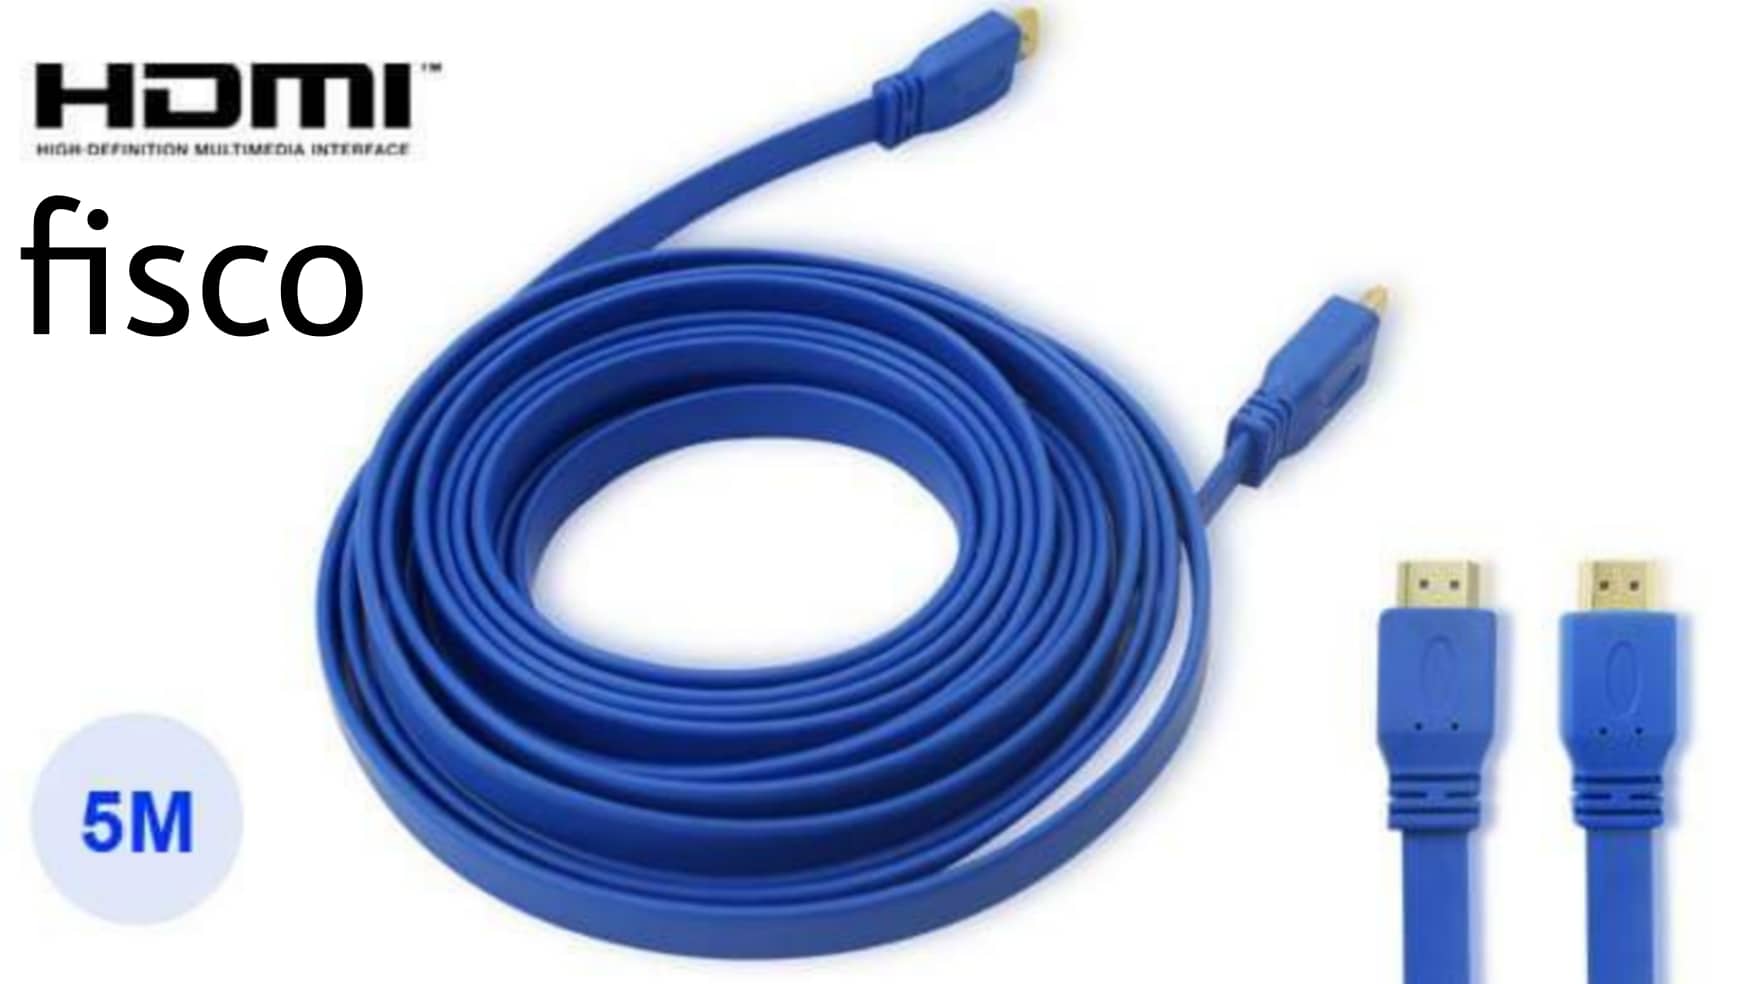 product.php?id=HDMI CABLE 5 METER FLAT